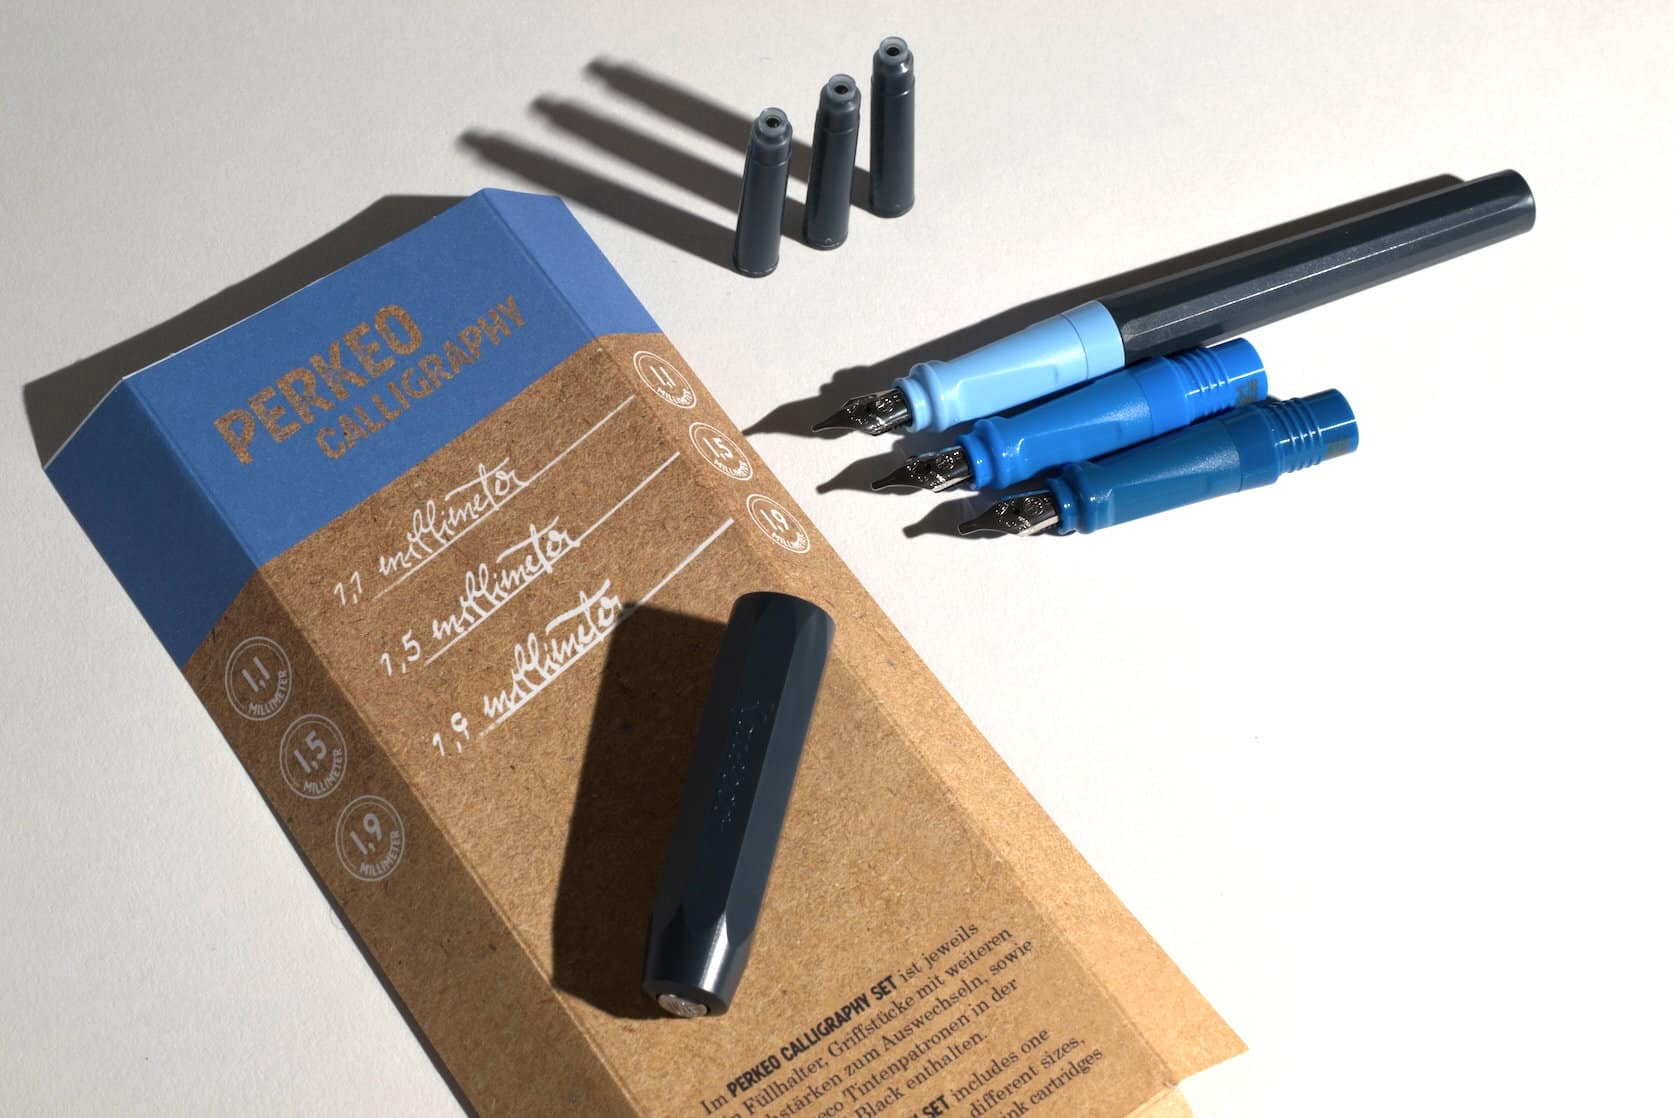 A biue/dark blue fountain pen lies on a white surface. Next to it are two fountain pen front parts with slightly broader nibs and three ink cartridges. A portion of the product packaging is visible. Text reads: Perkeo Calligraphy. It shows writing samples of the three included nib sizes. The nib sizes are 1.1 mm, 1.5 mm and 1.9 mm.